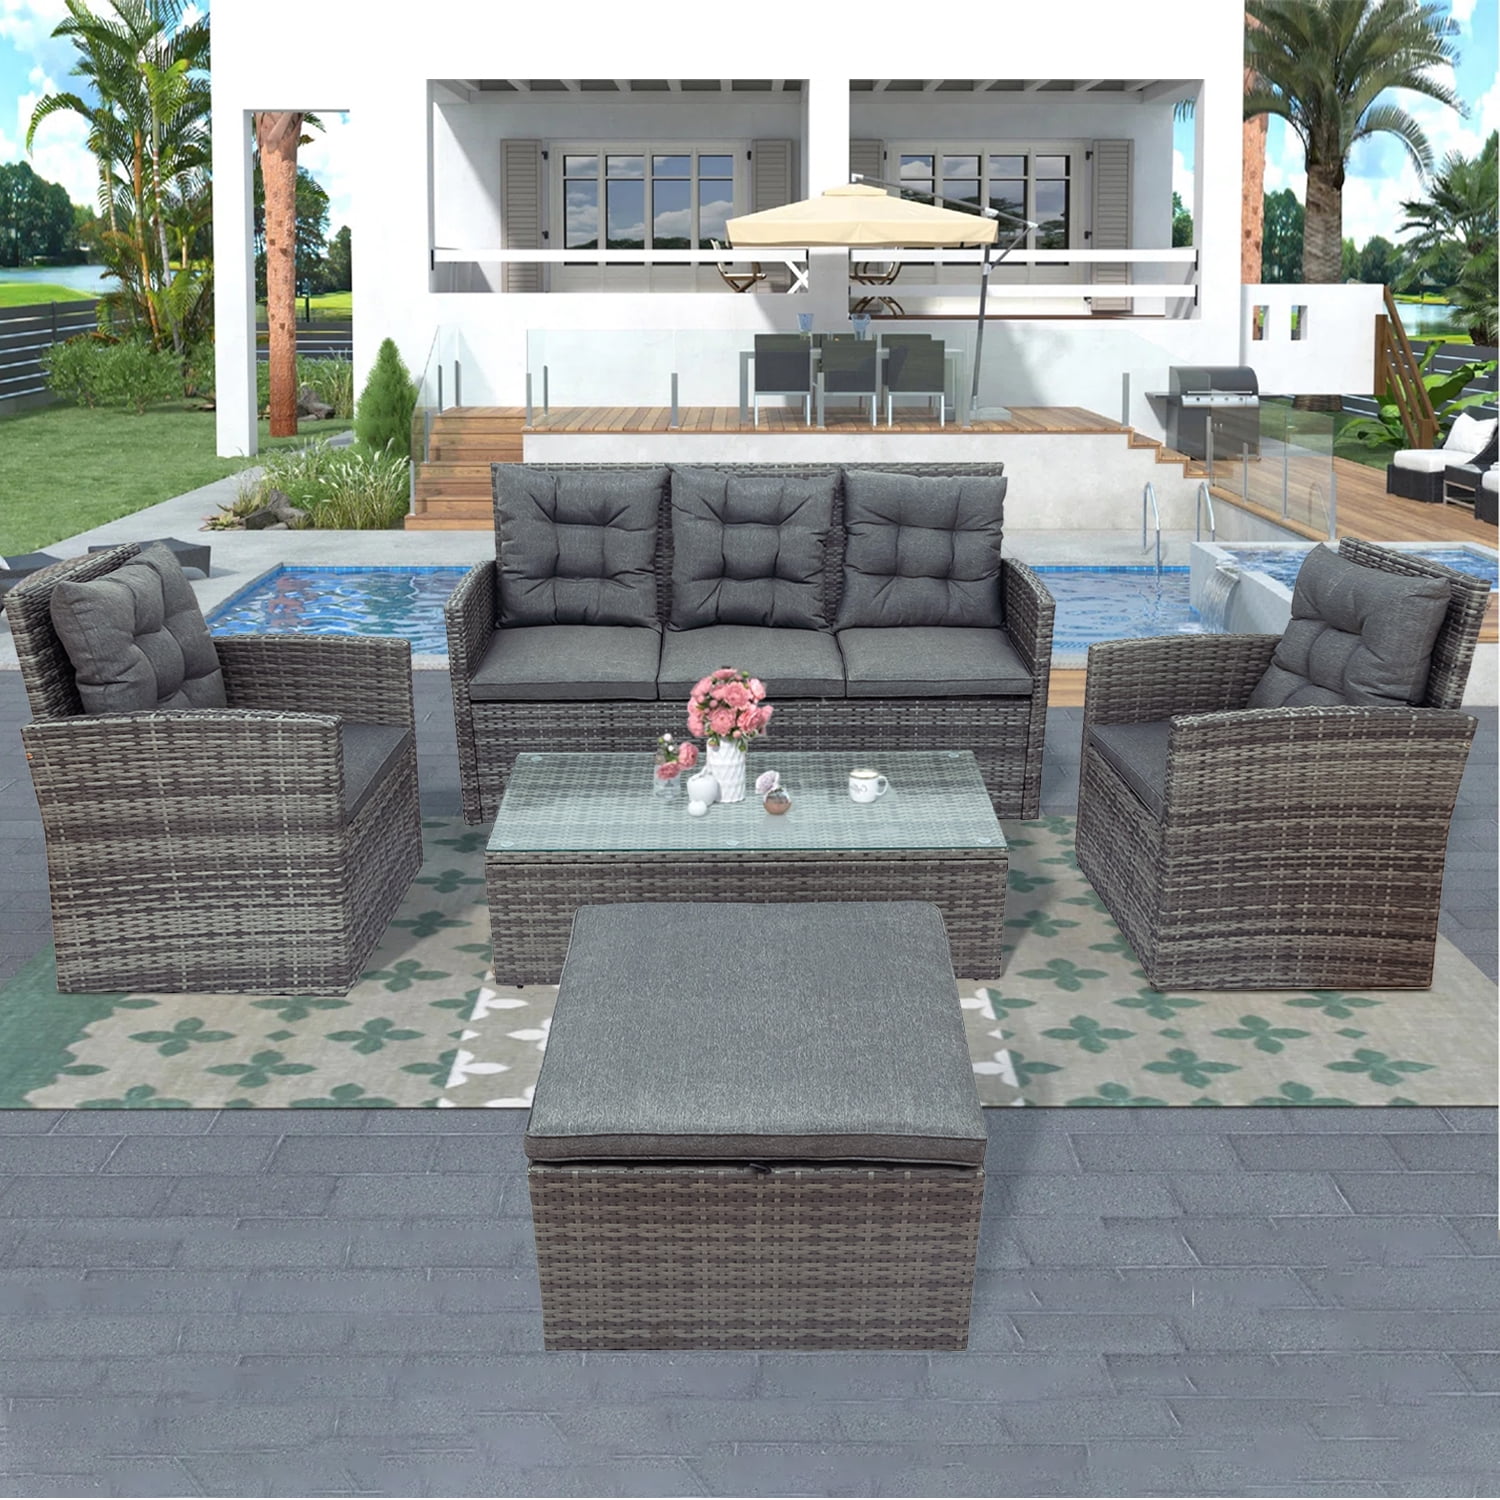 5 Pieces Patio Furniture Set Rattan Outdoor Sectional Conversation Sets 3-Seat Outdoor Couch, 2 Single Chairs & Ottoman for Lawn, Balcony, Garden, Backyard, Gray